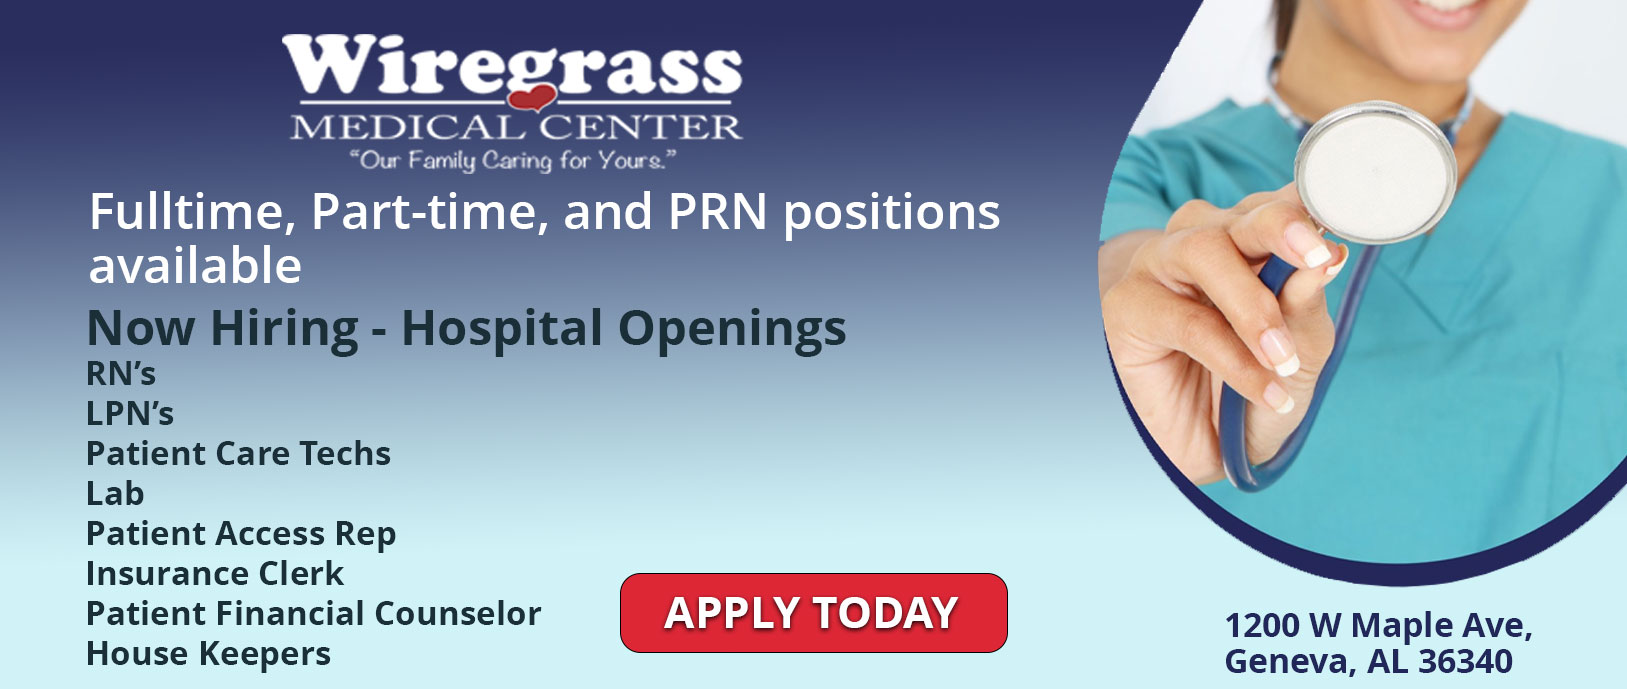 Fulltime, Part-time, and PRN positions available 
Now Hiring- Hospital Openings
RN's
LPN's
Patient Care Techs
Lab
Patient Access Rep
Insurance Clerk
Patient Financial Counselor
House Keepers

1200 W Male Ave,
Geneva, AL 36340

(APPLY TODAY)